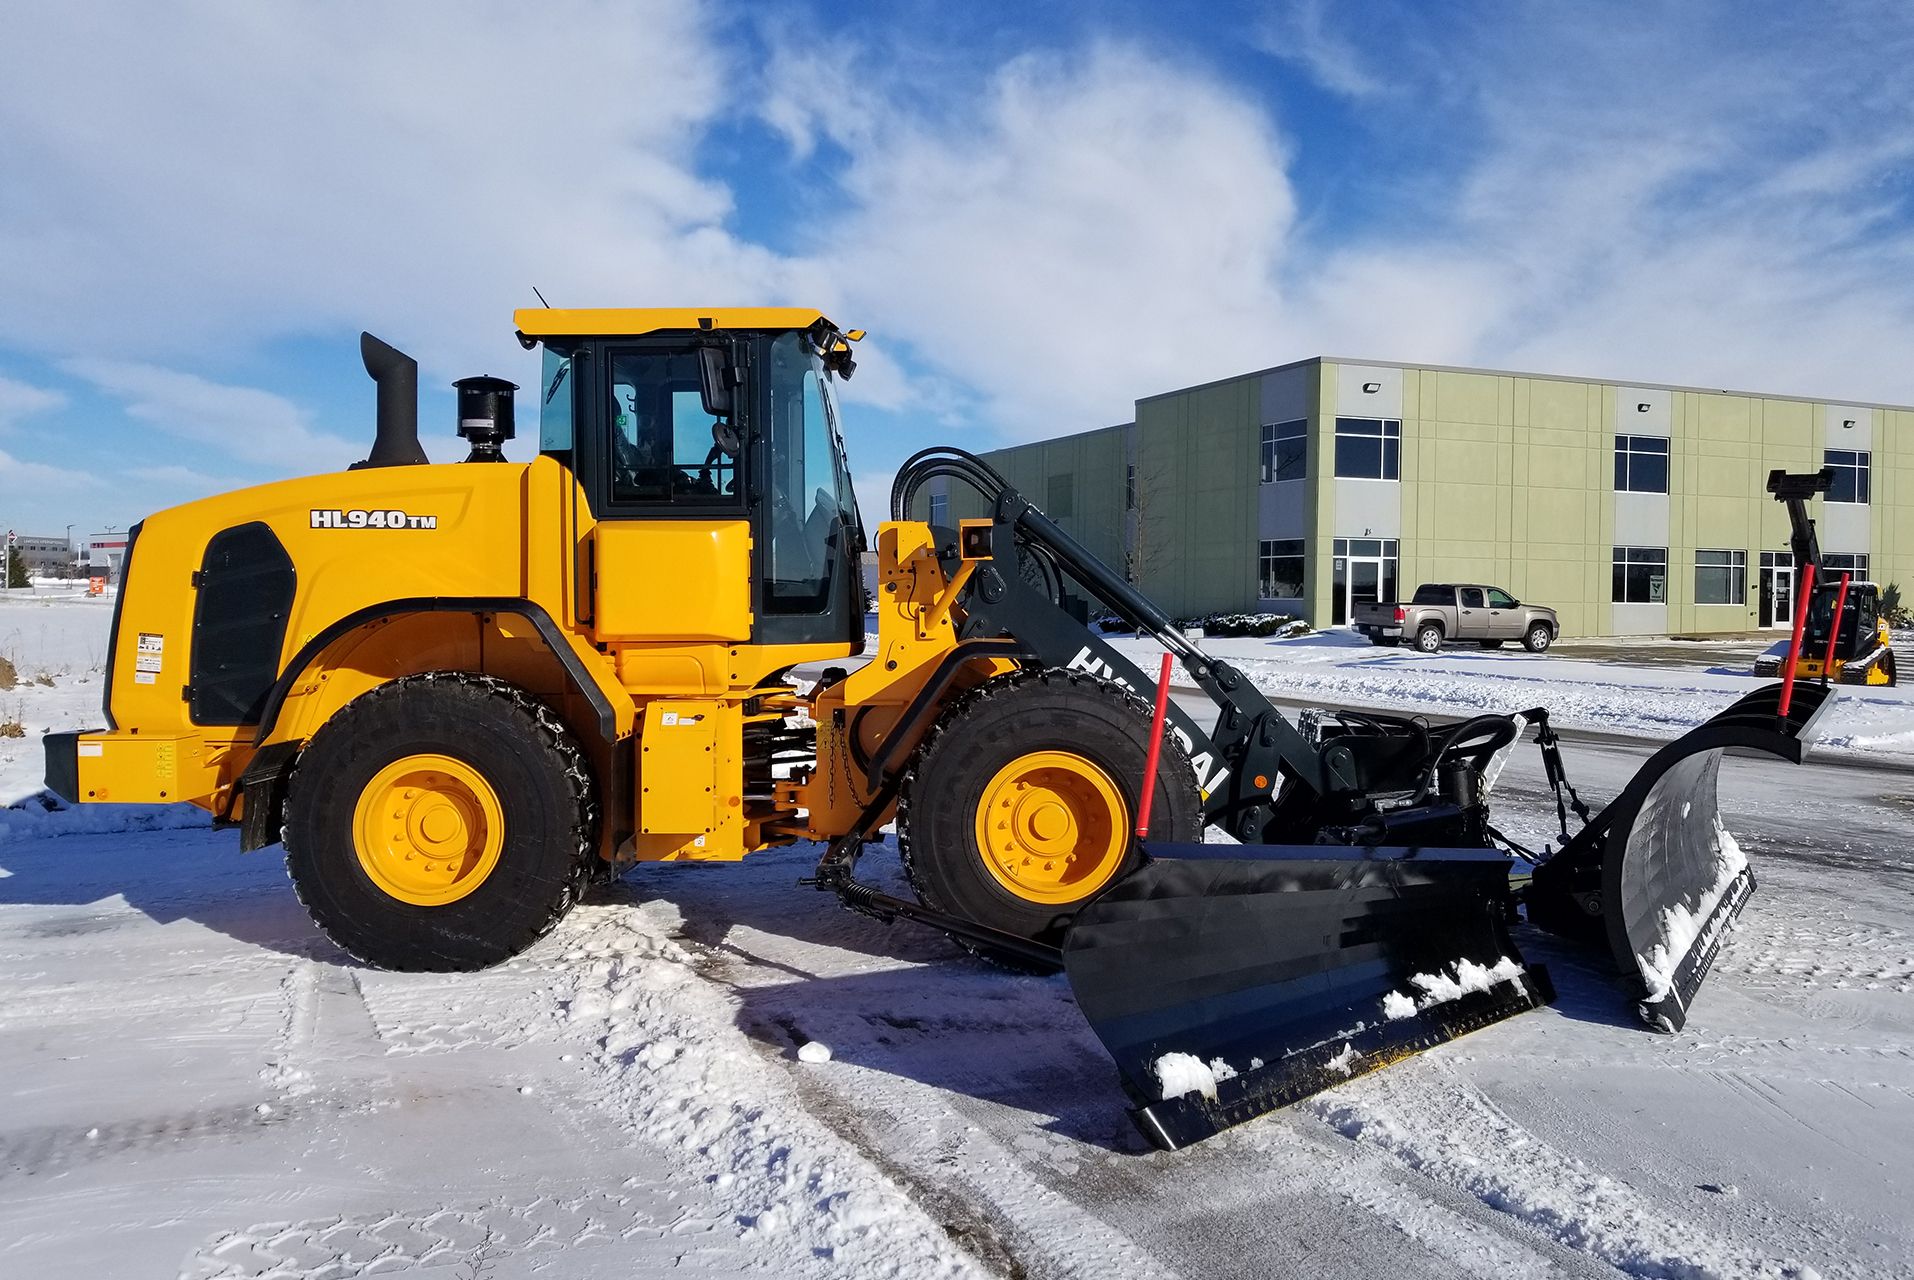 HL940TM Wheel Loader With Burke-Yes Equipment Wing & Snow Plow Set Up